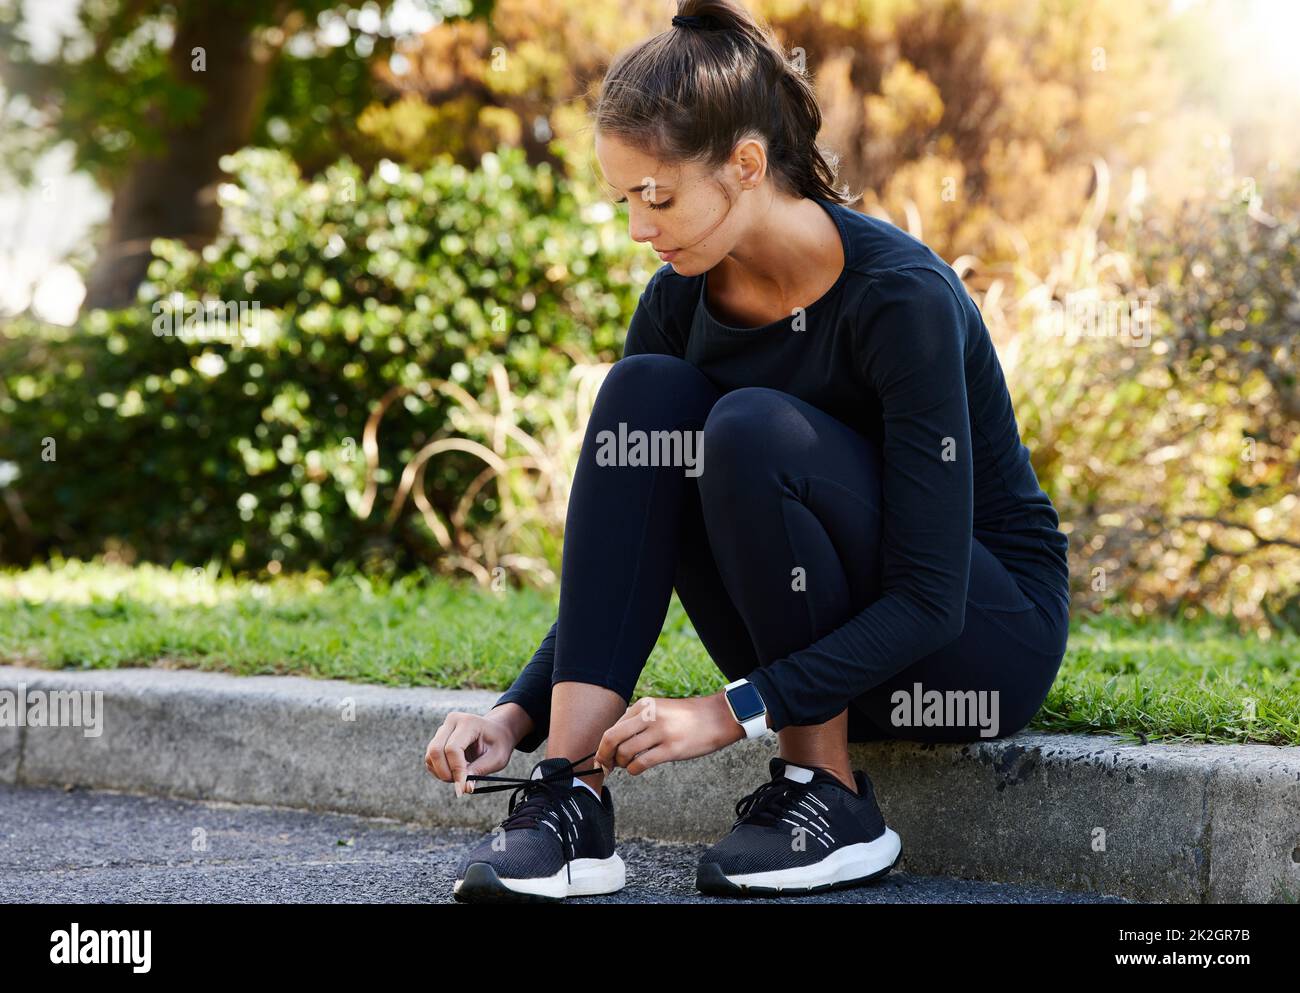 Making sure her laces are nice and tight. Full length shot of an attractive and athletic young woman tying her shoelaces while sitting on the curb outdoors. Stock Photo